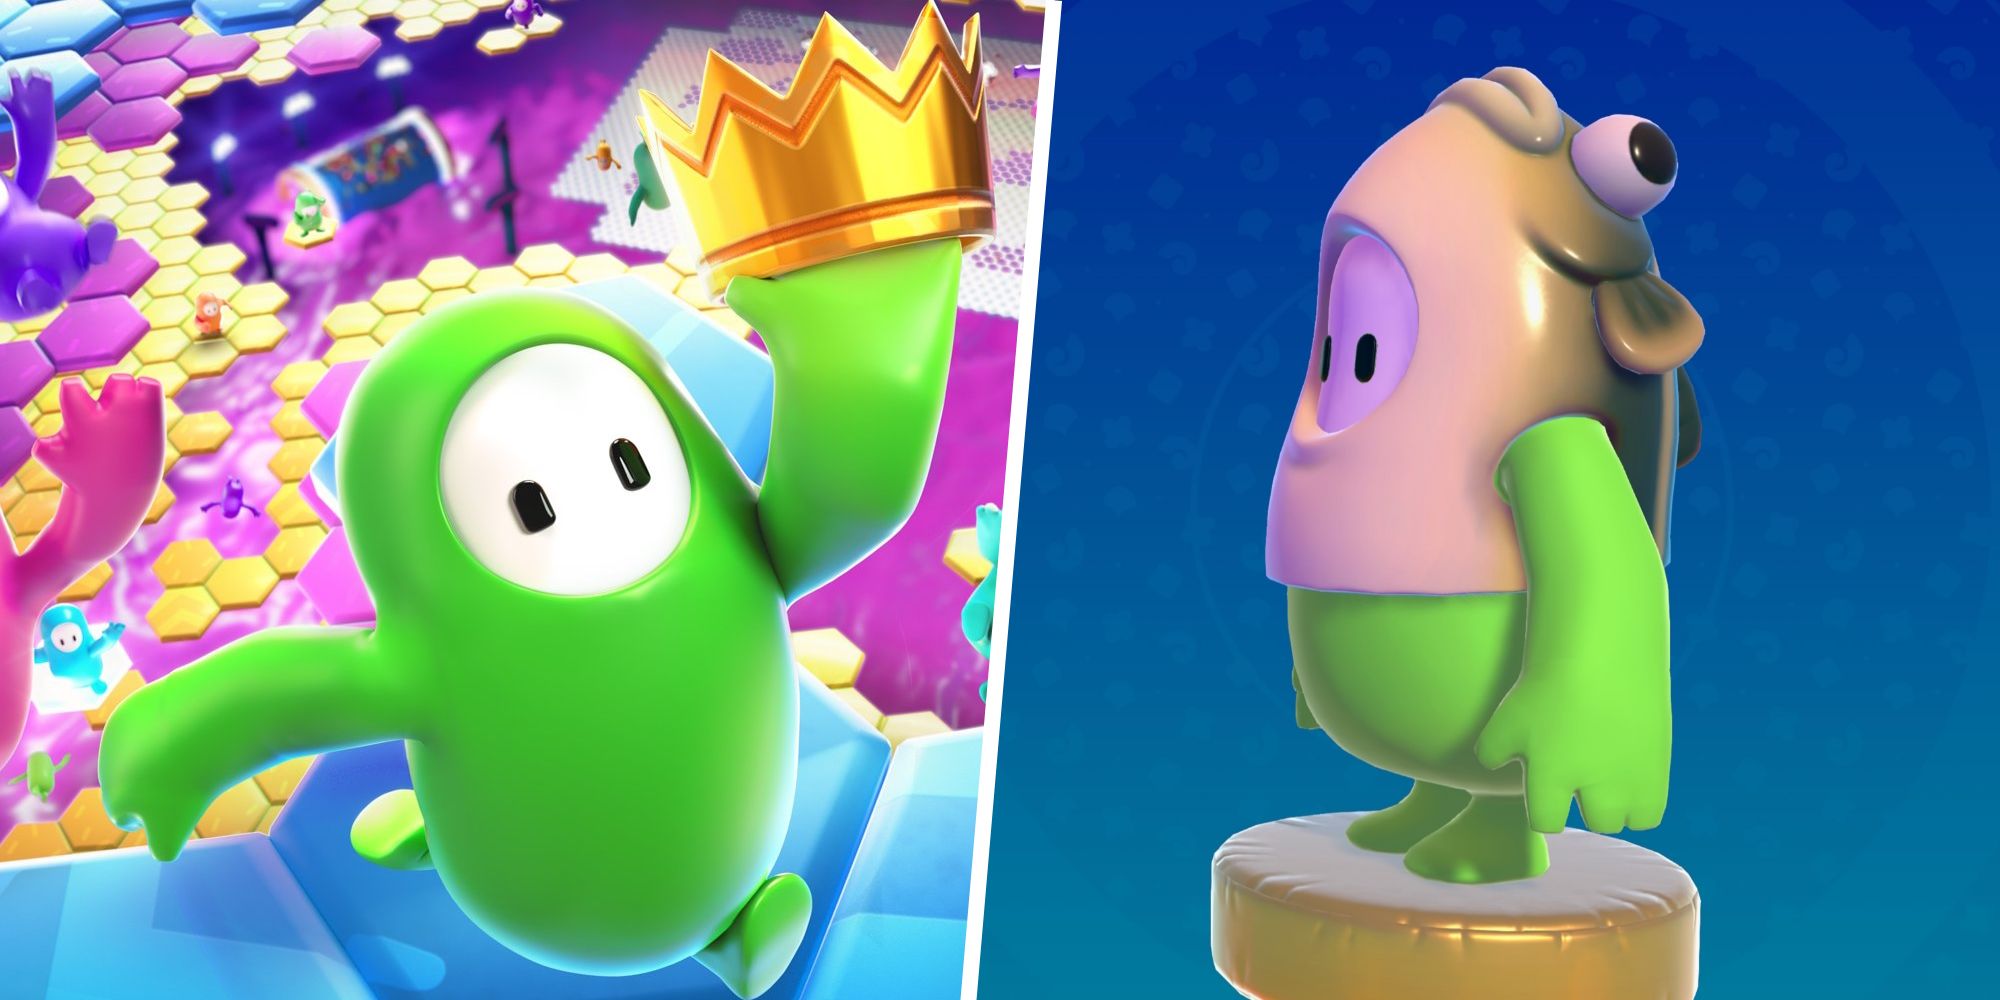 A collage showing a character with a crown on the left and a character using a fish outfit on the right.